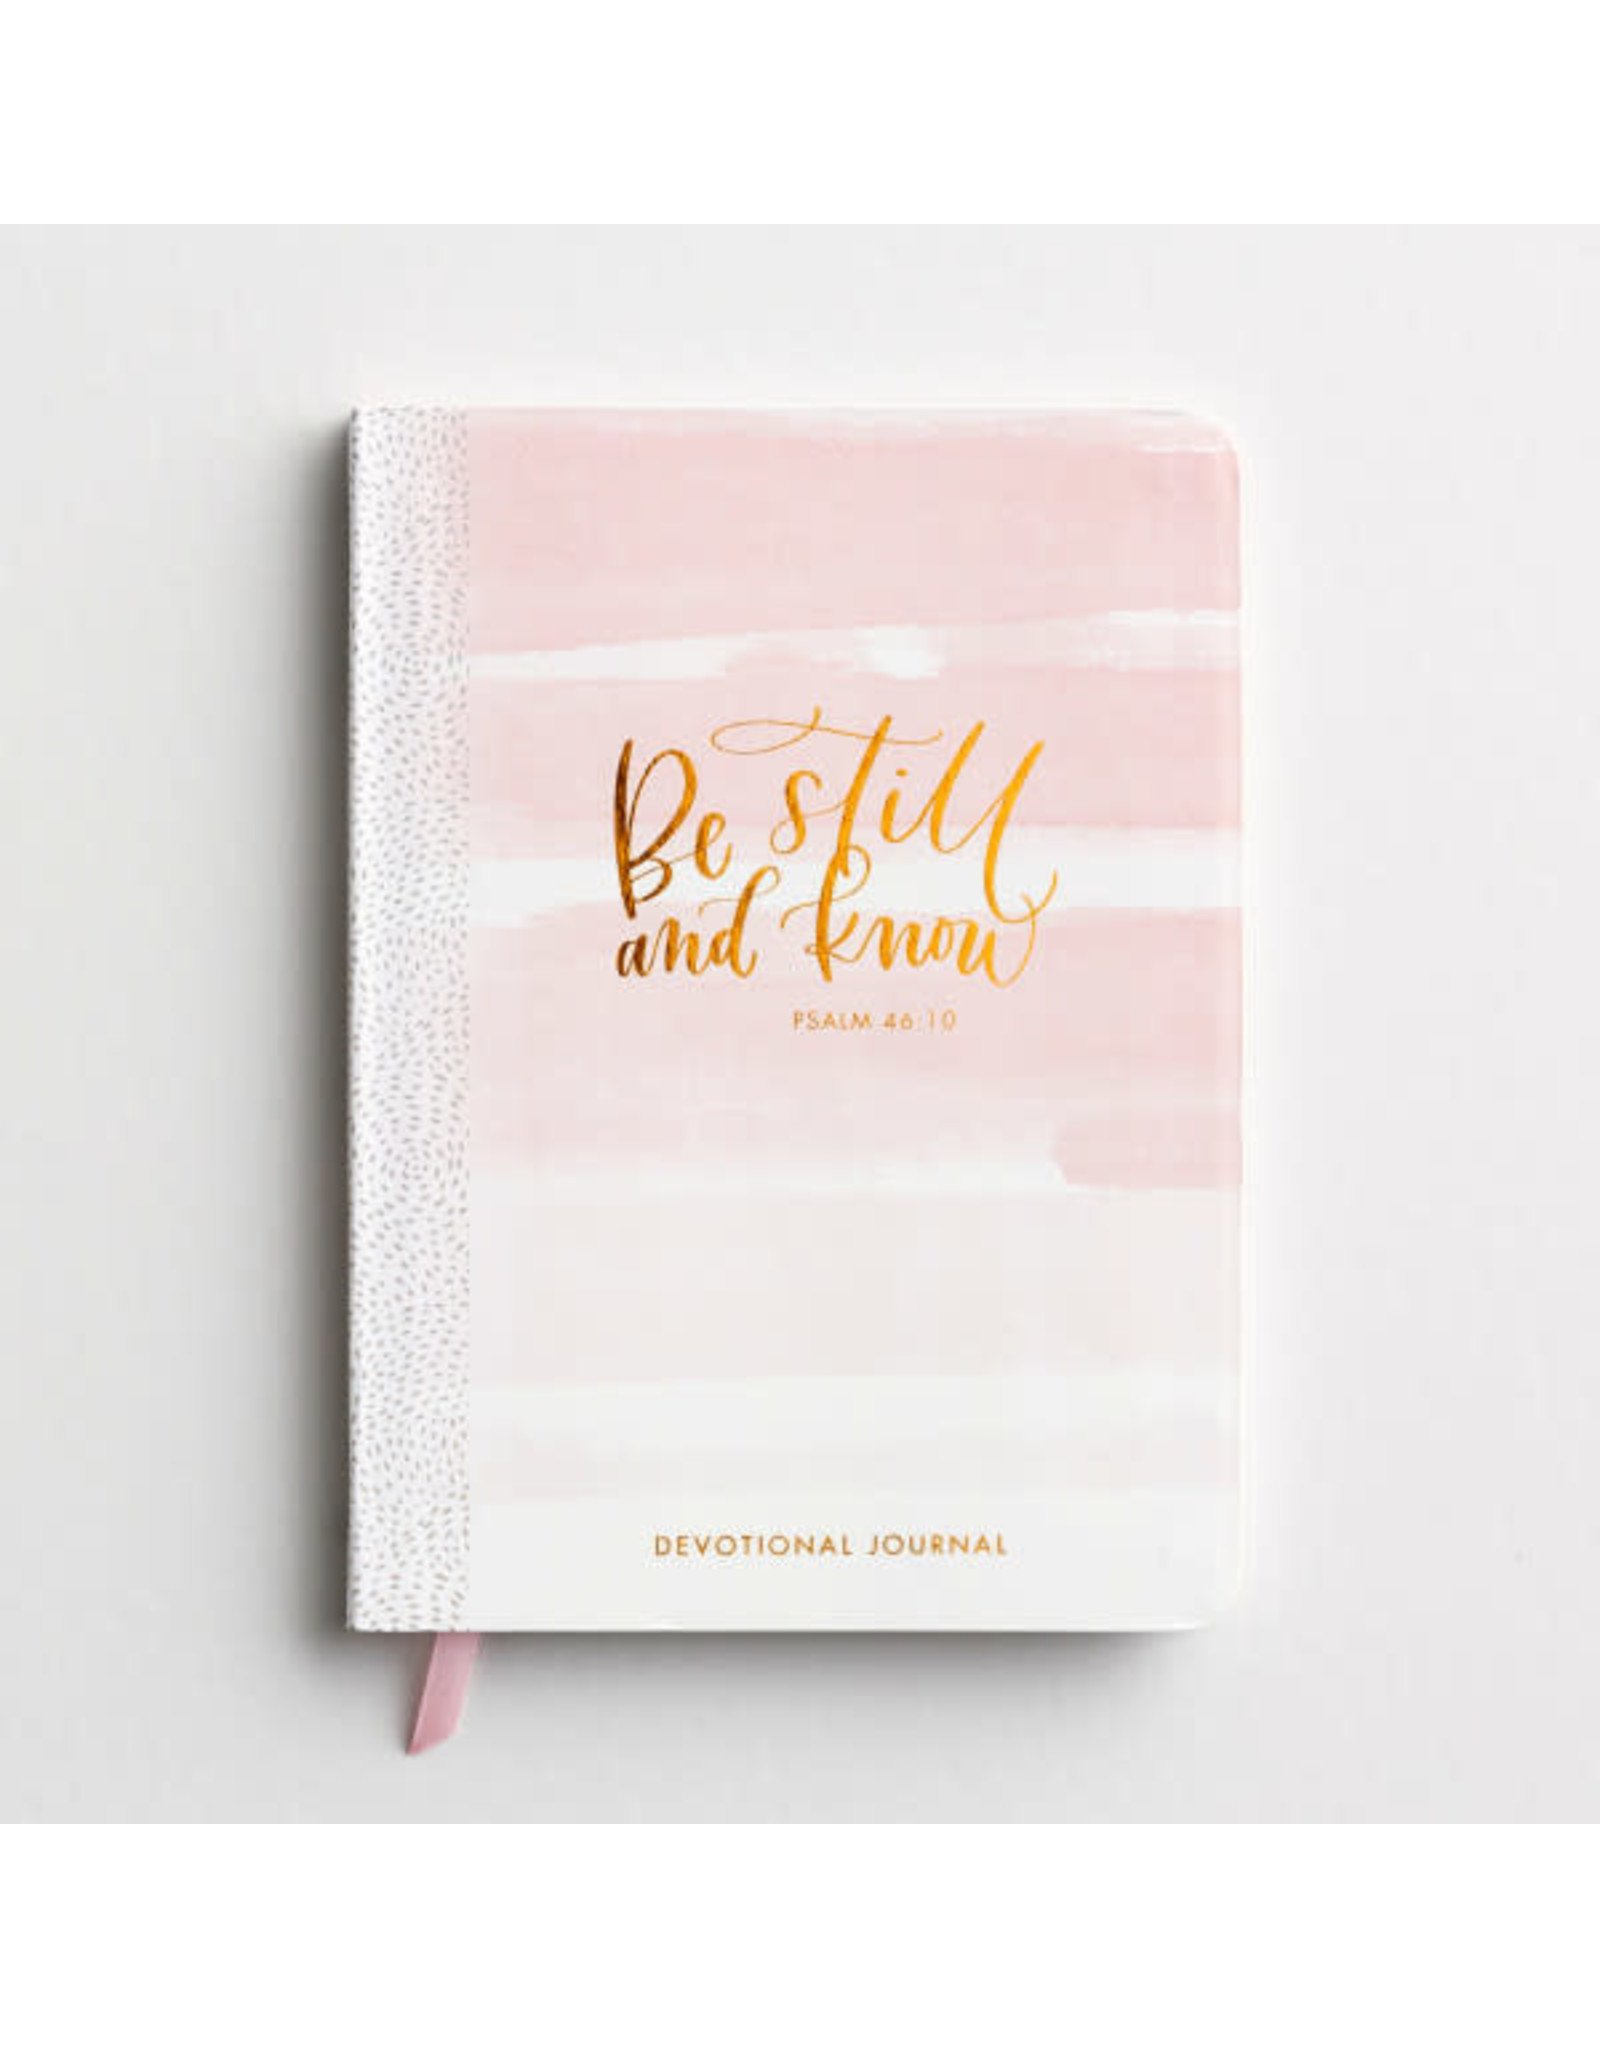 Devotional Journal - Be Still and Know